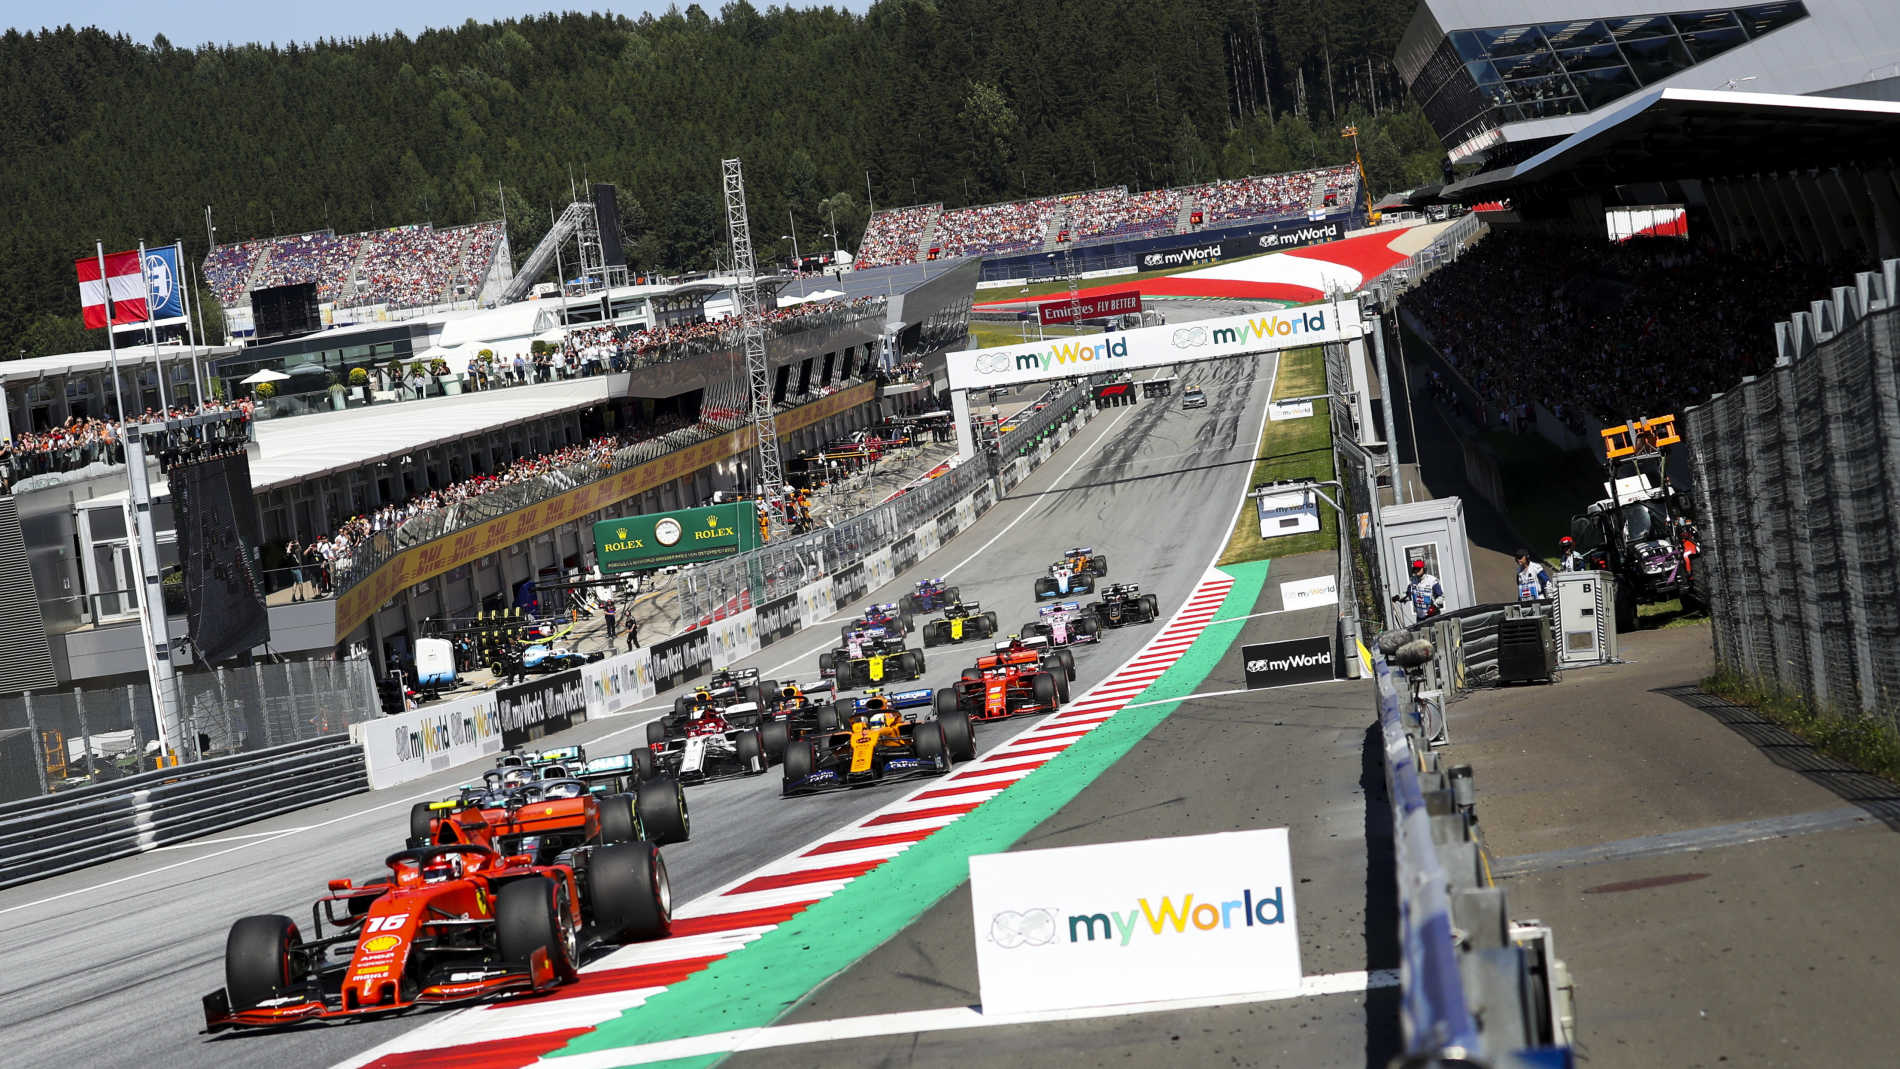 F1 confirms first 8 races of revised 2020 calendar, starting with Austria double header Formula 1®